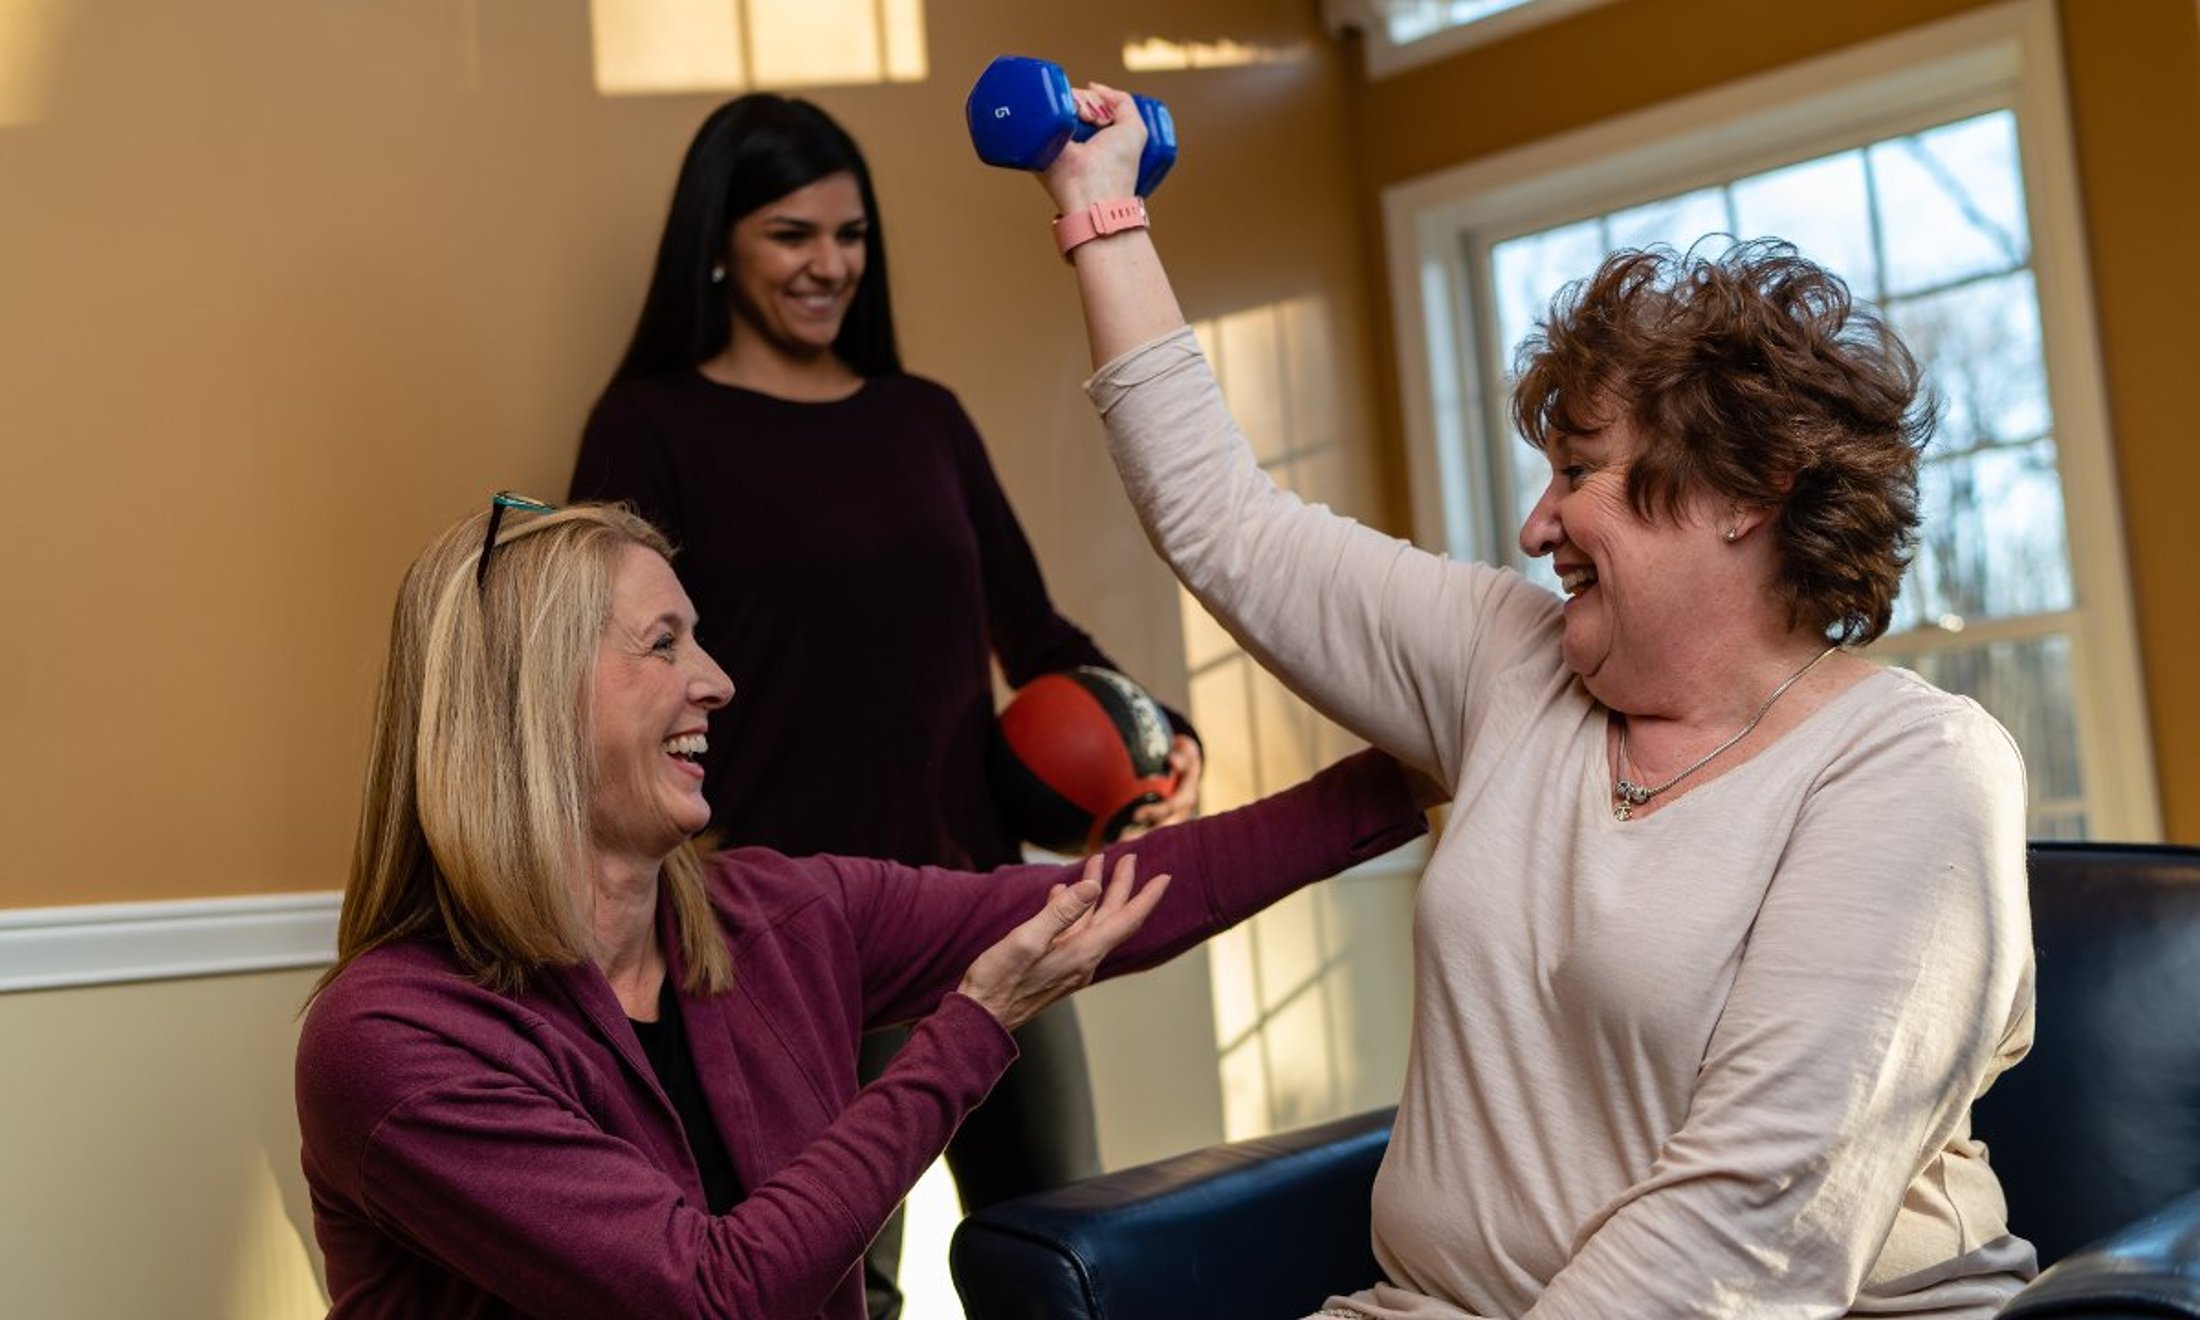 Physical therapy professor and student with woman holding weight